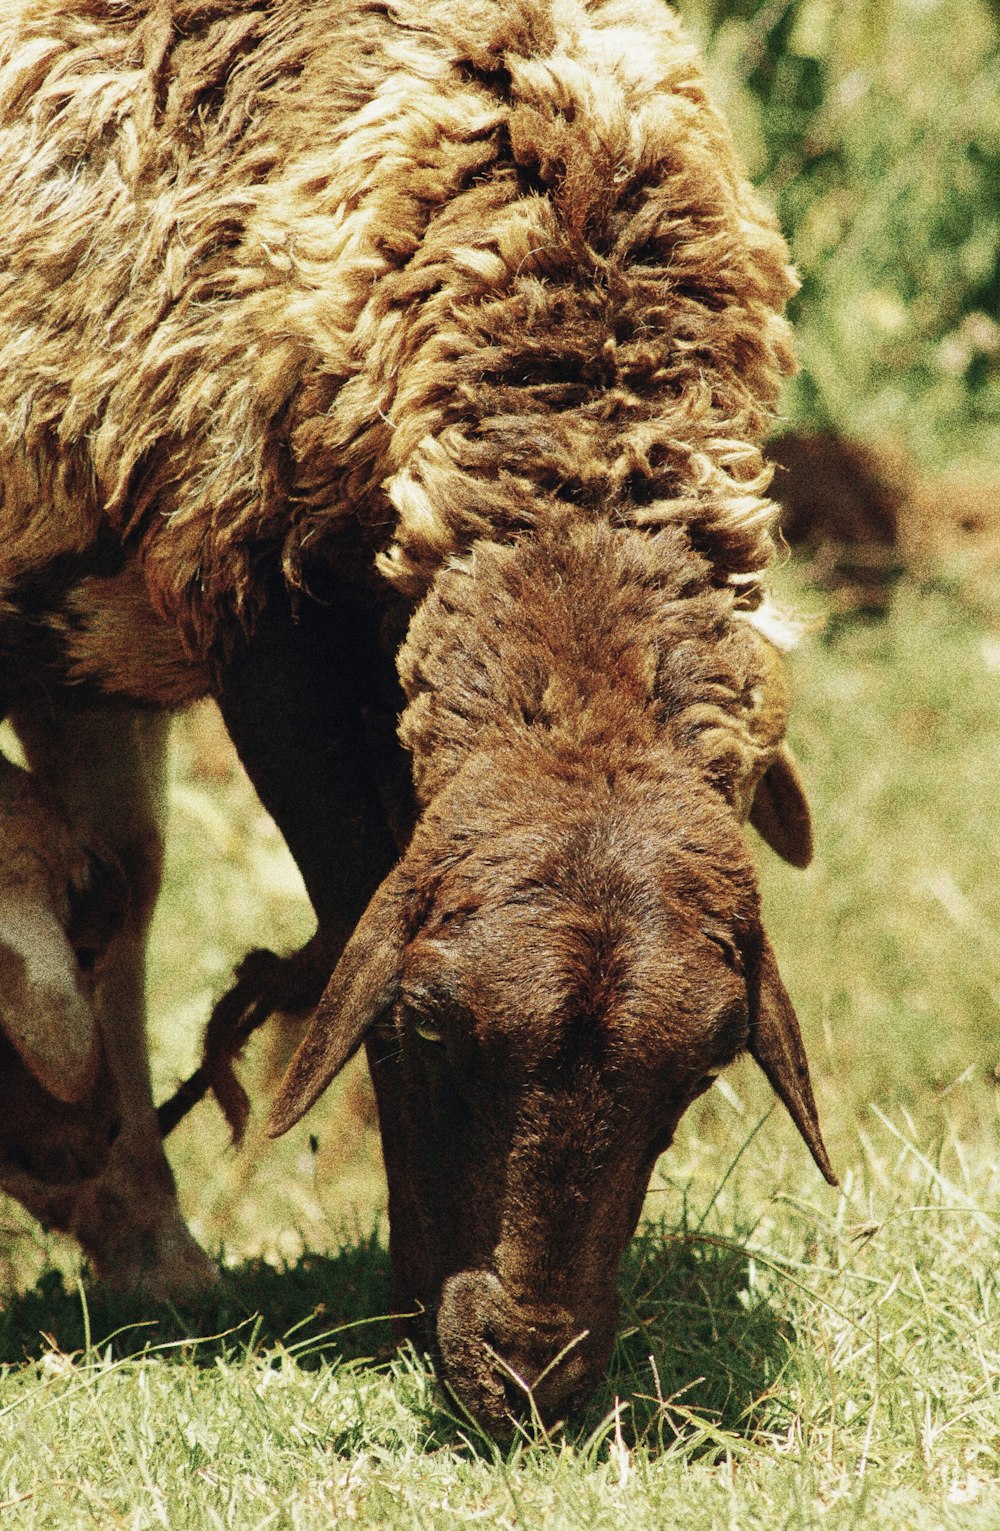 a sheep grazing on grass in a field